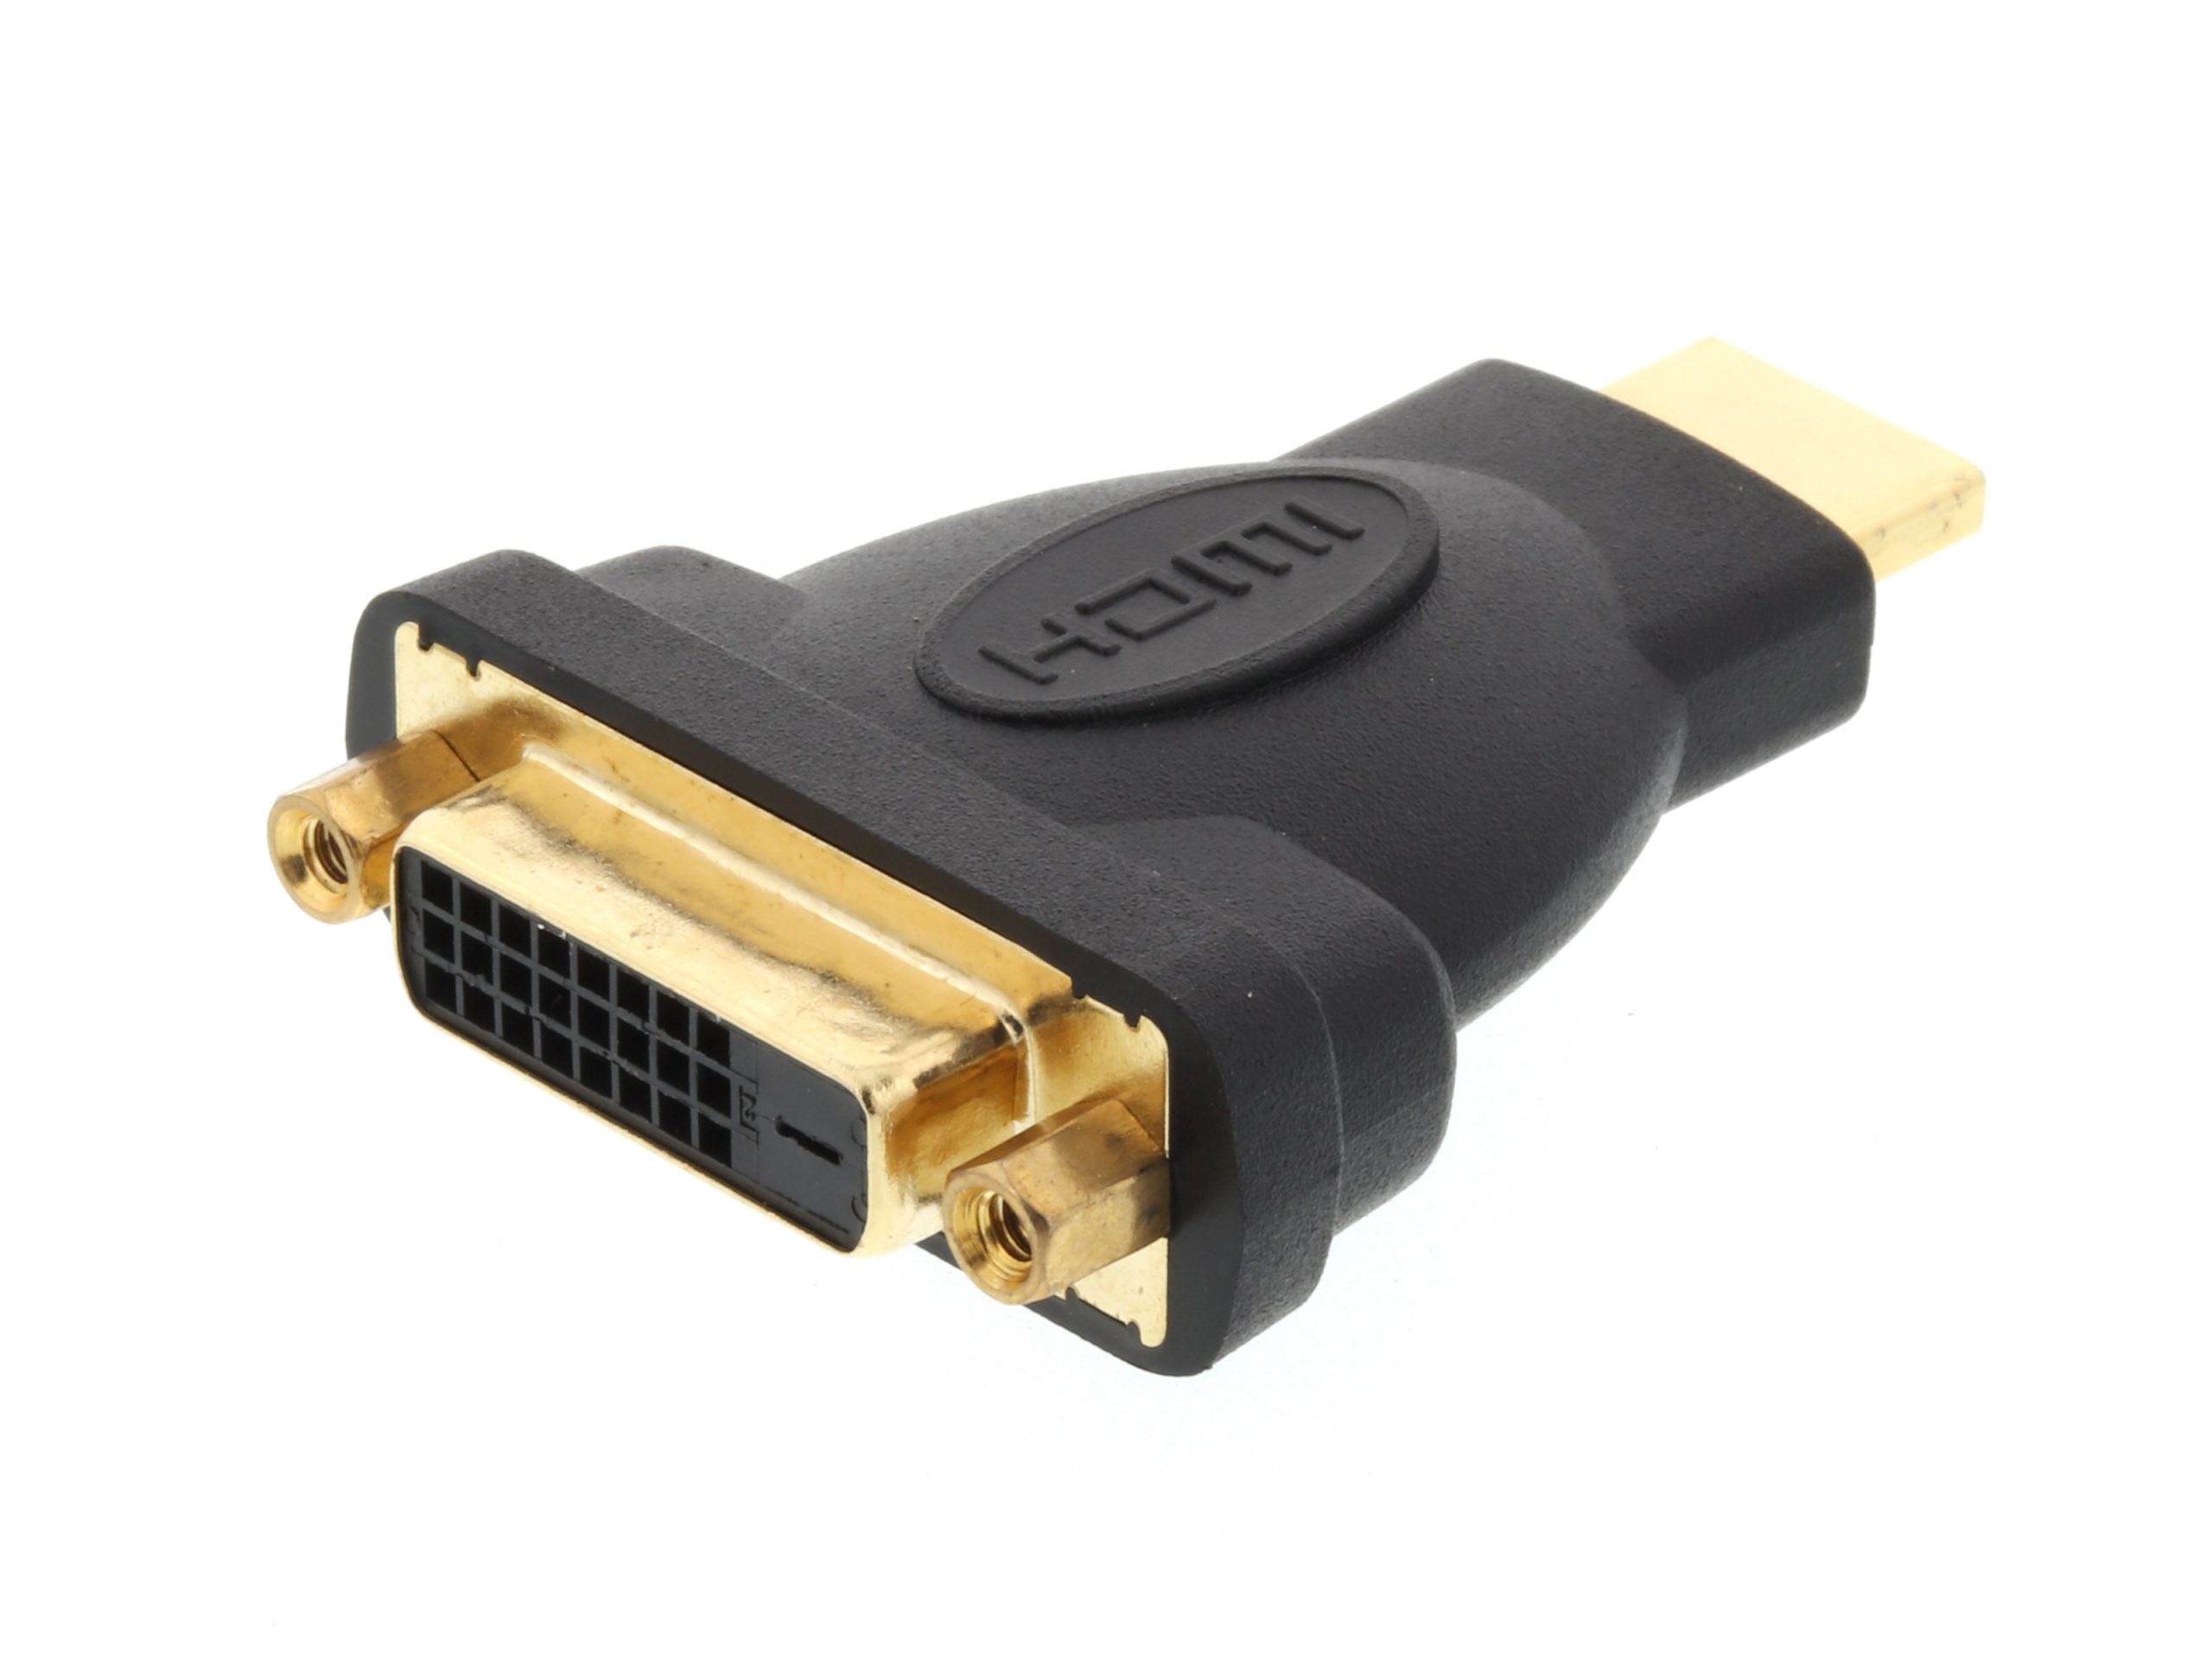 DVI D Female to HDMI Male Adapter scaled